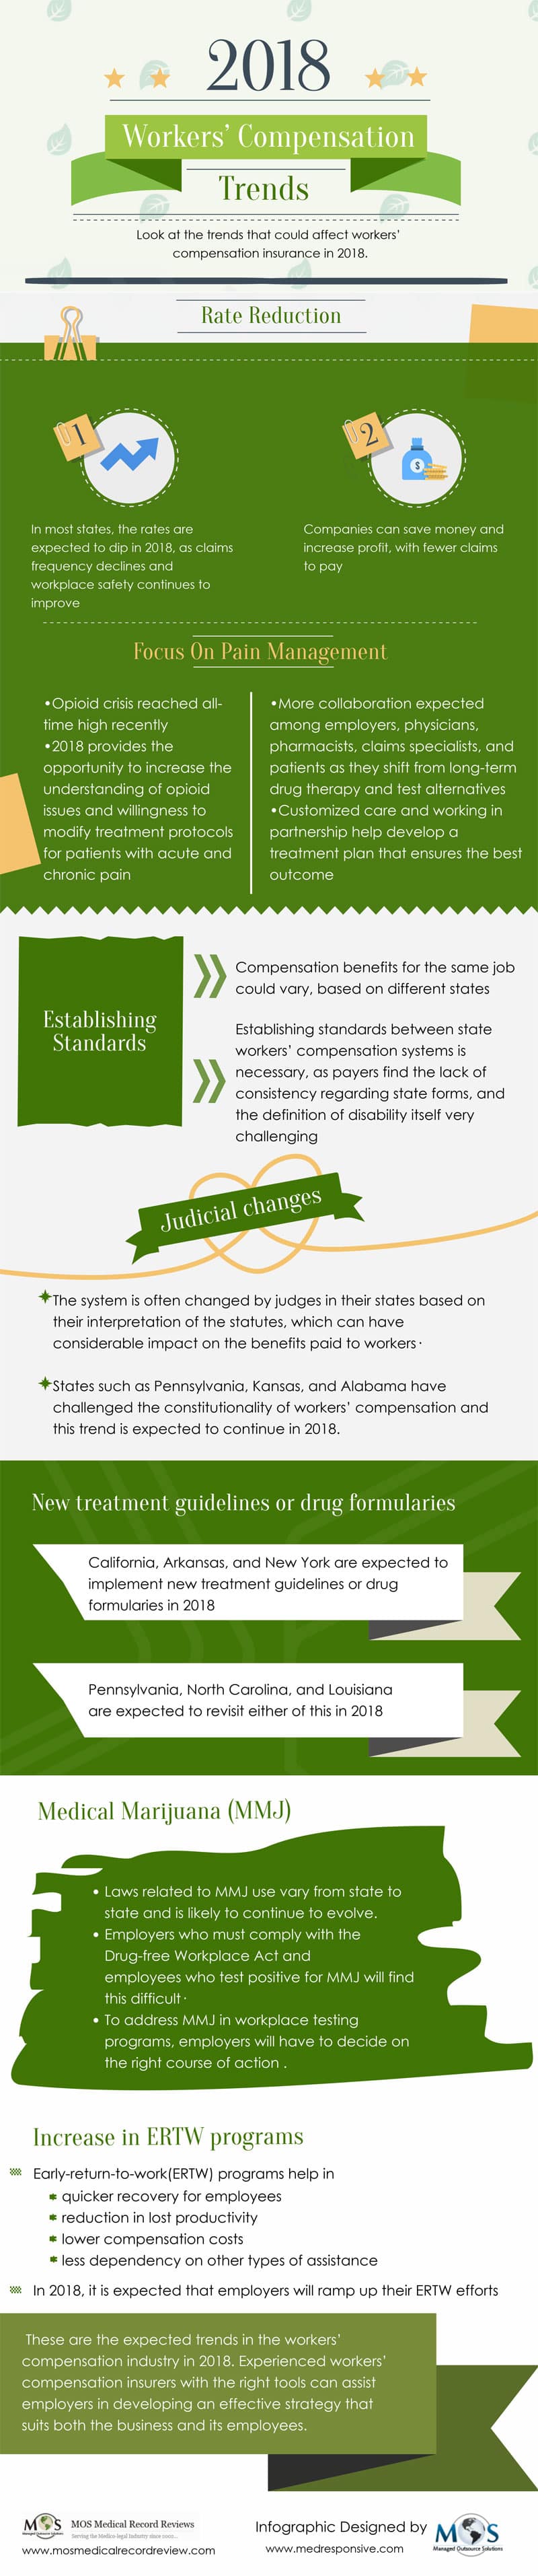 Workers' Compensation Trends